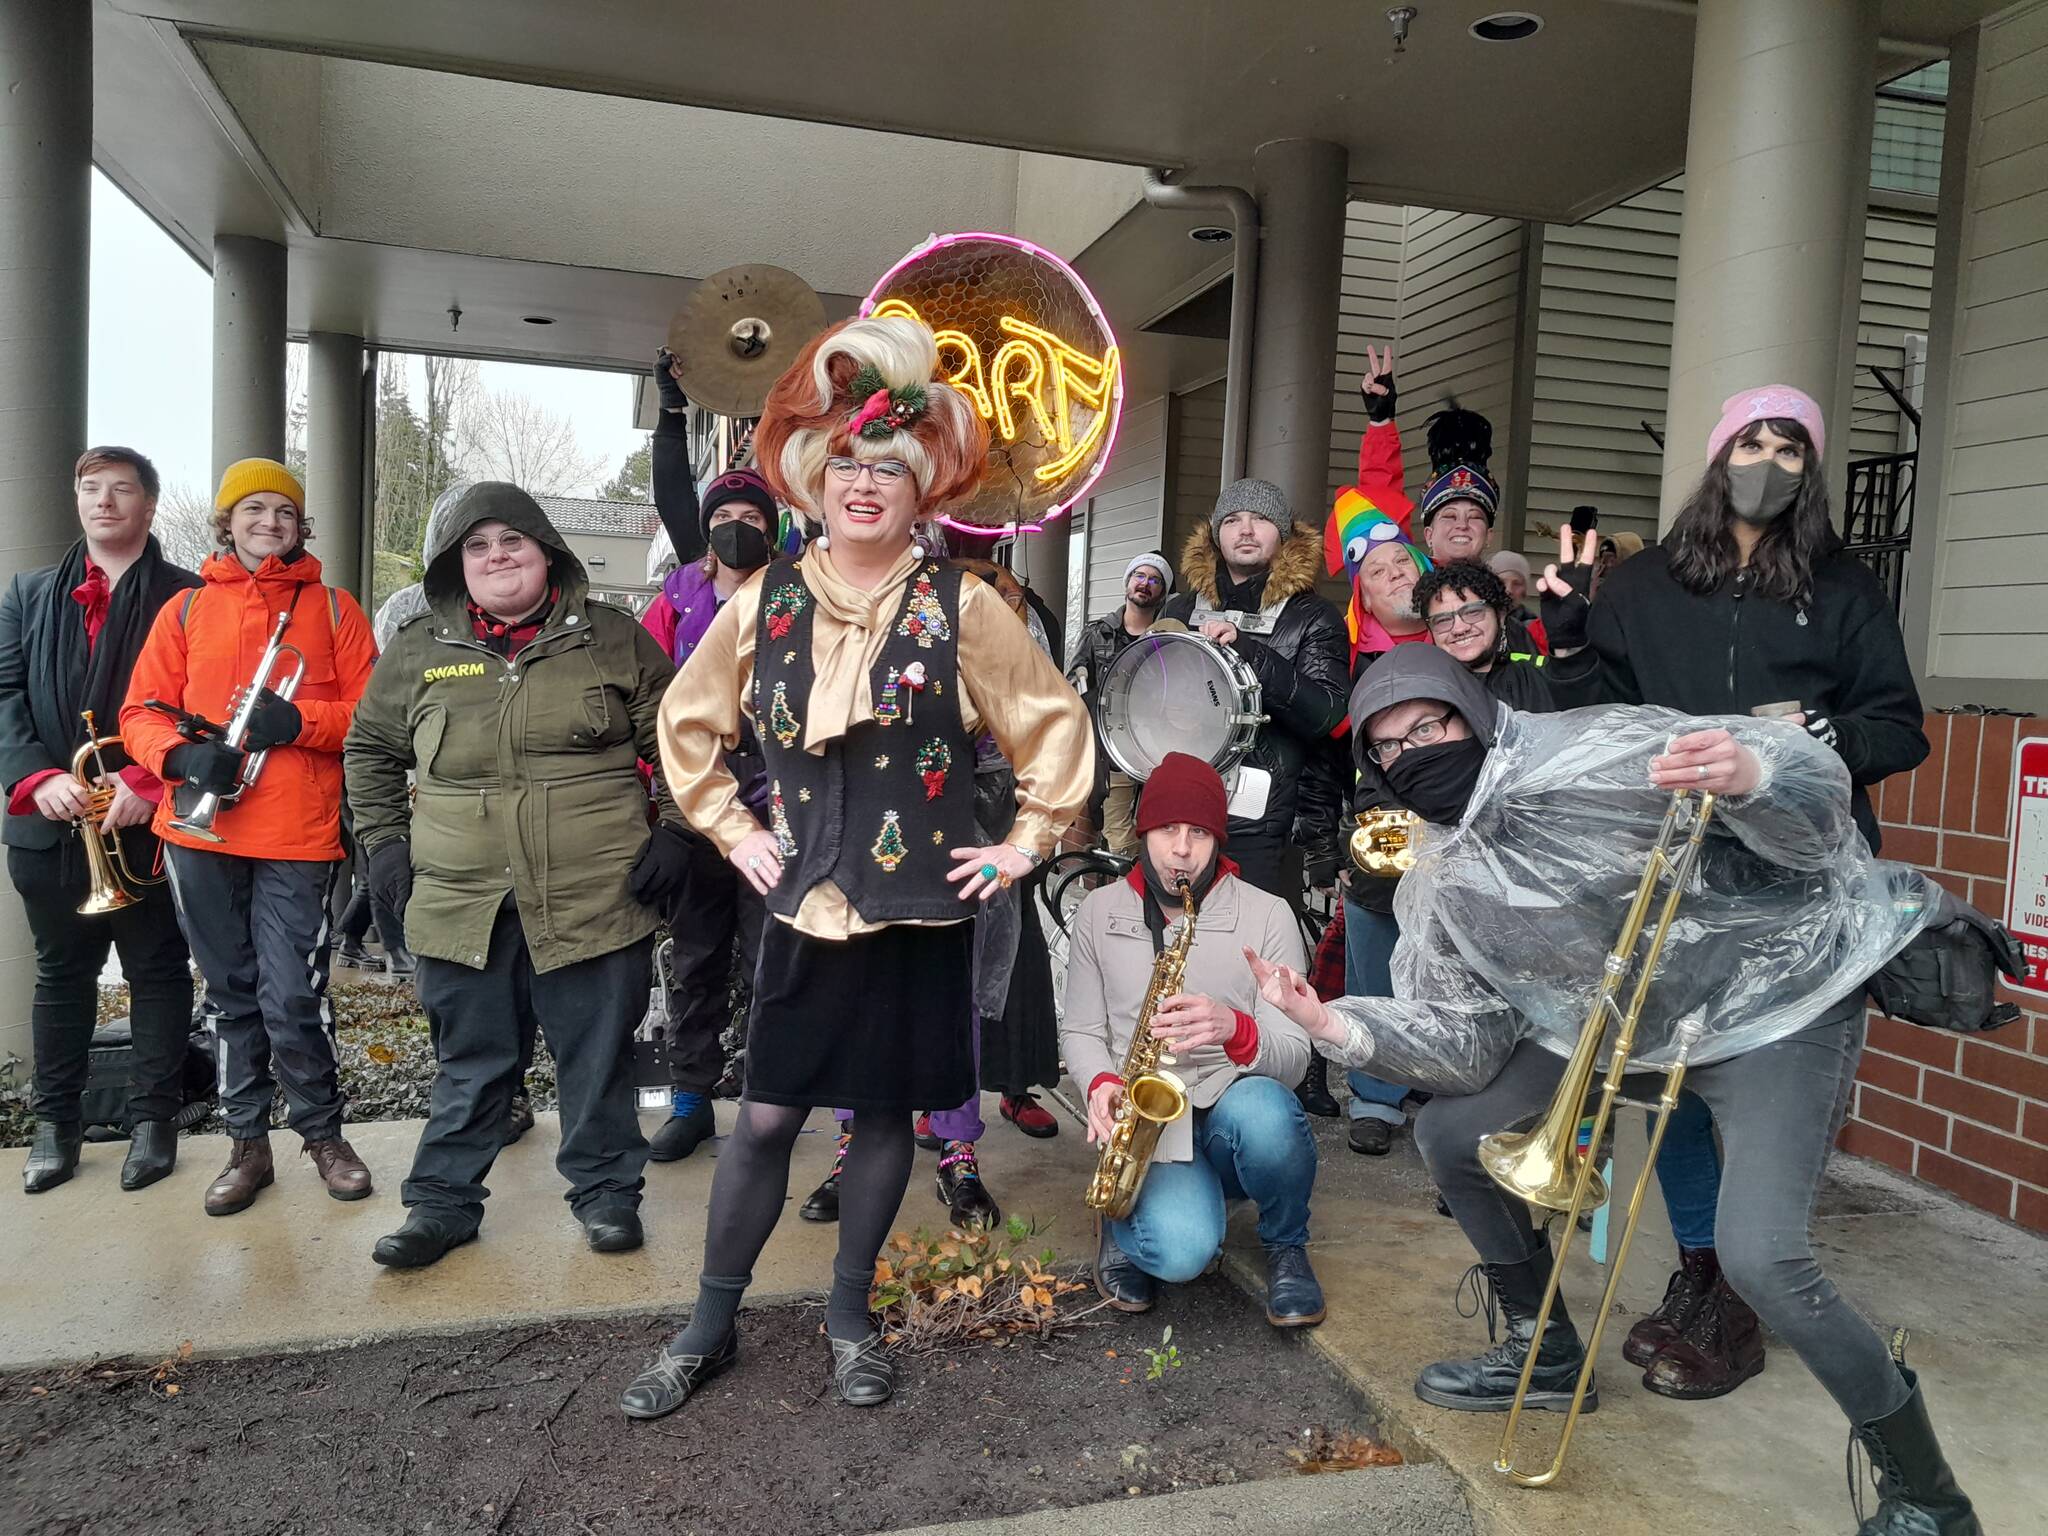 Photo by Bailey Jo Josie/Sound Publishing.
Sylvia O’Stayformore (center, in the Christmas sweater and wig) poses with counter-protesters hours before she reads children’s books for her monthly Drag Queen Story Time.